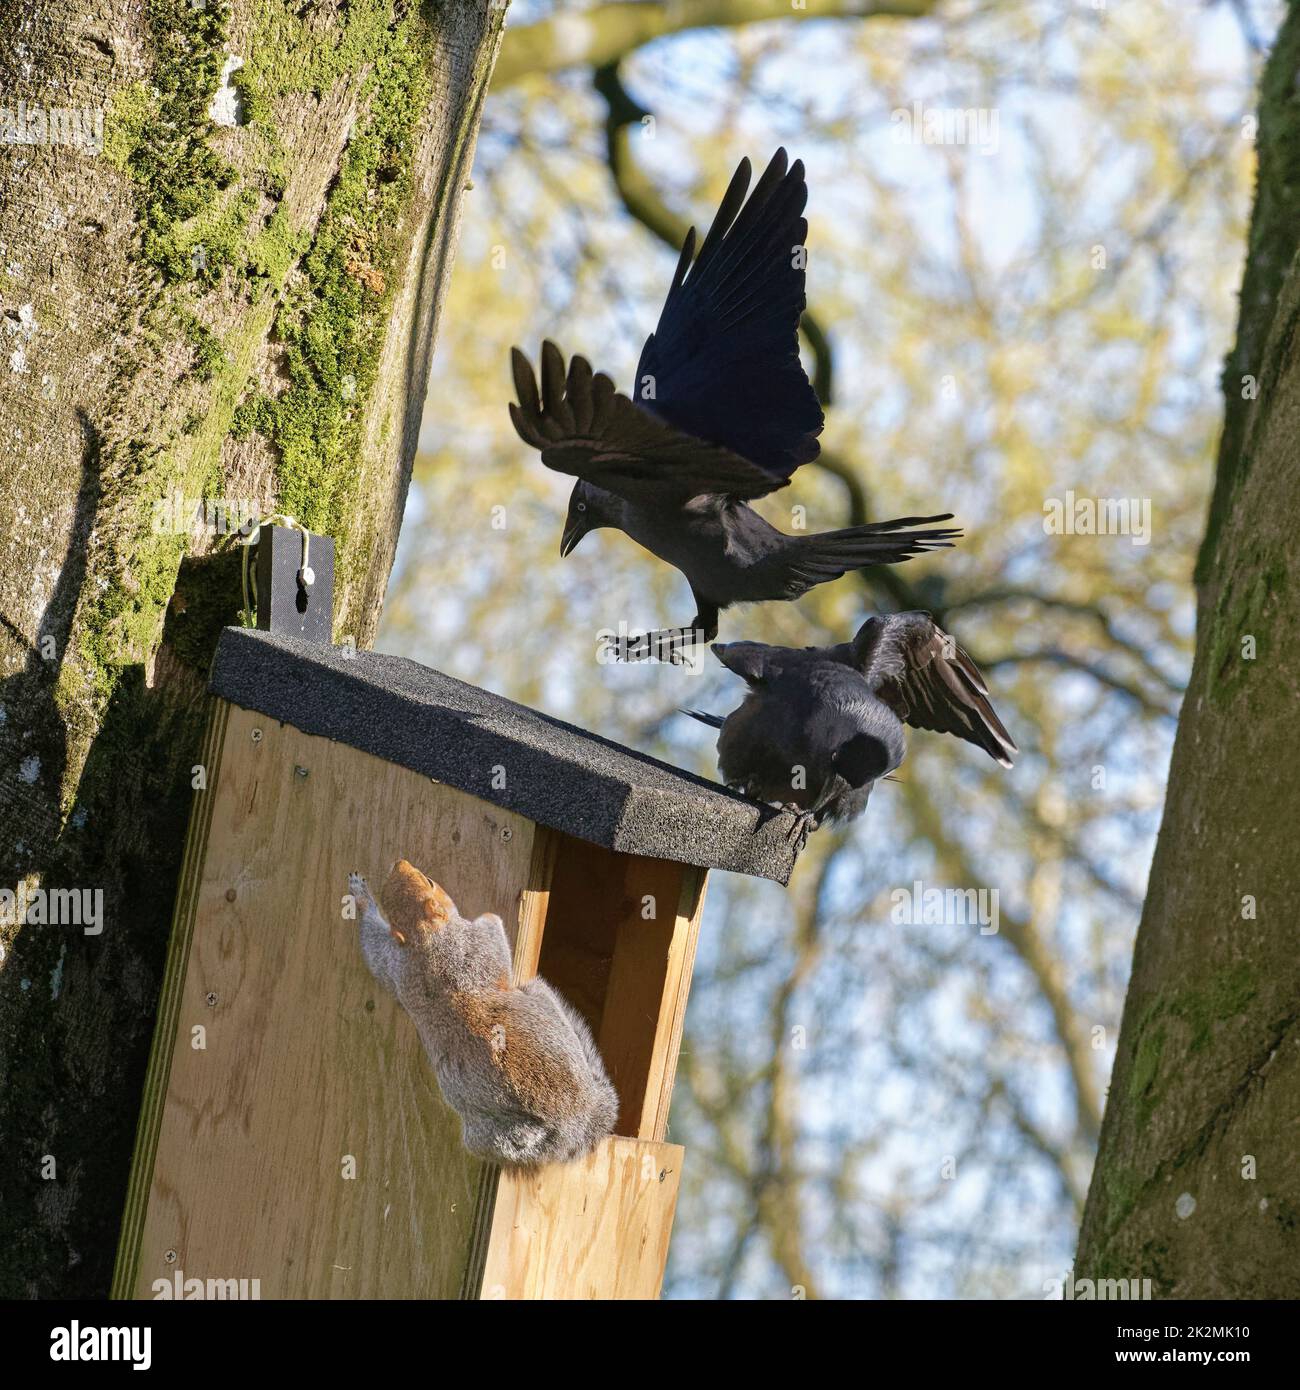 Jackdaw (Corvus monedula) pair dive bombing a Grey squirrel (Sciurus carolinensis) as it emerges from a nest box the birds wants to nest in, Wiltshire Stock Photo